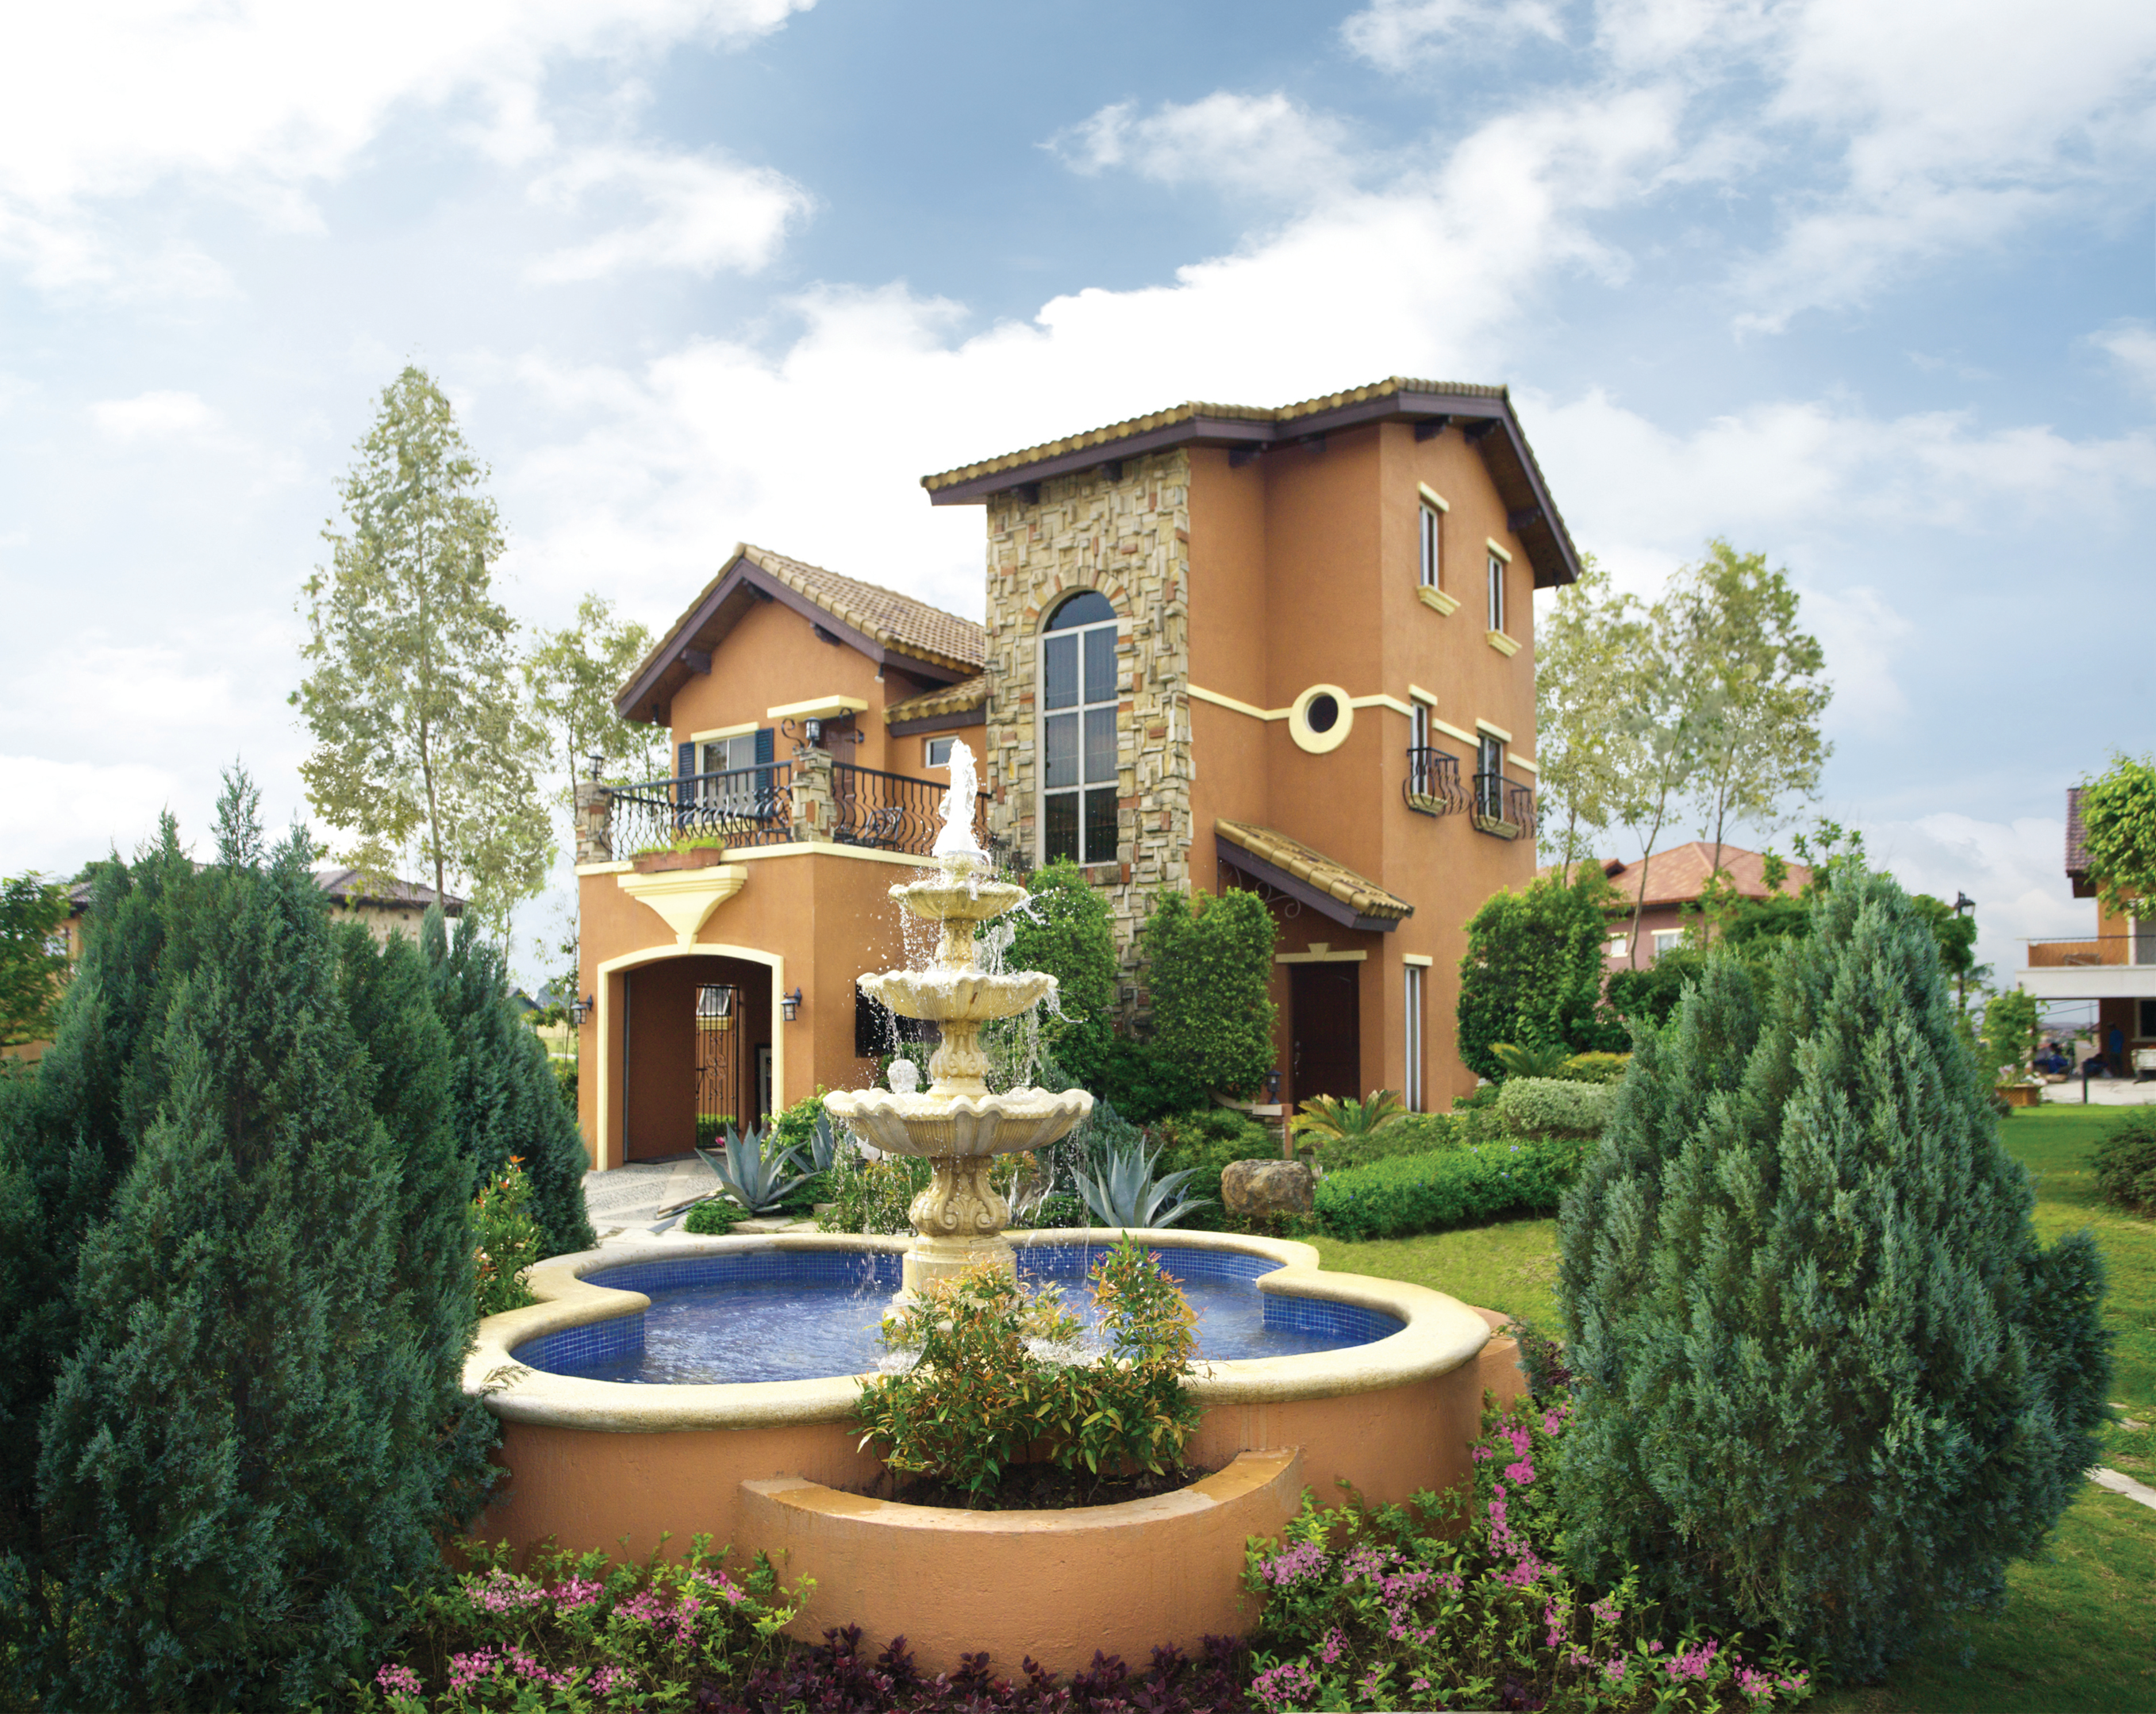 Image of a luxury home within the world-class community of Portofino Alabang